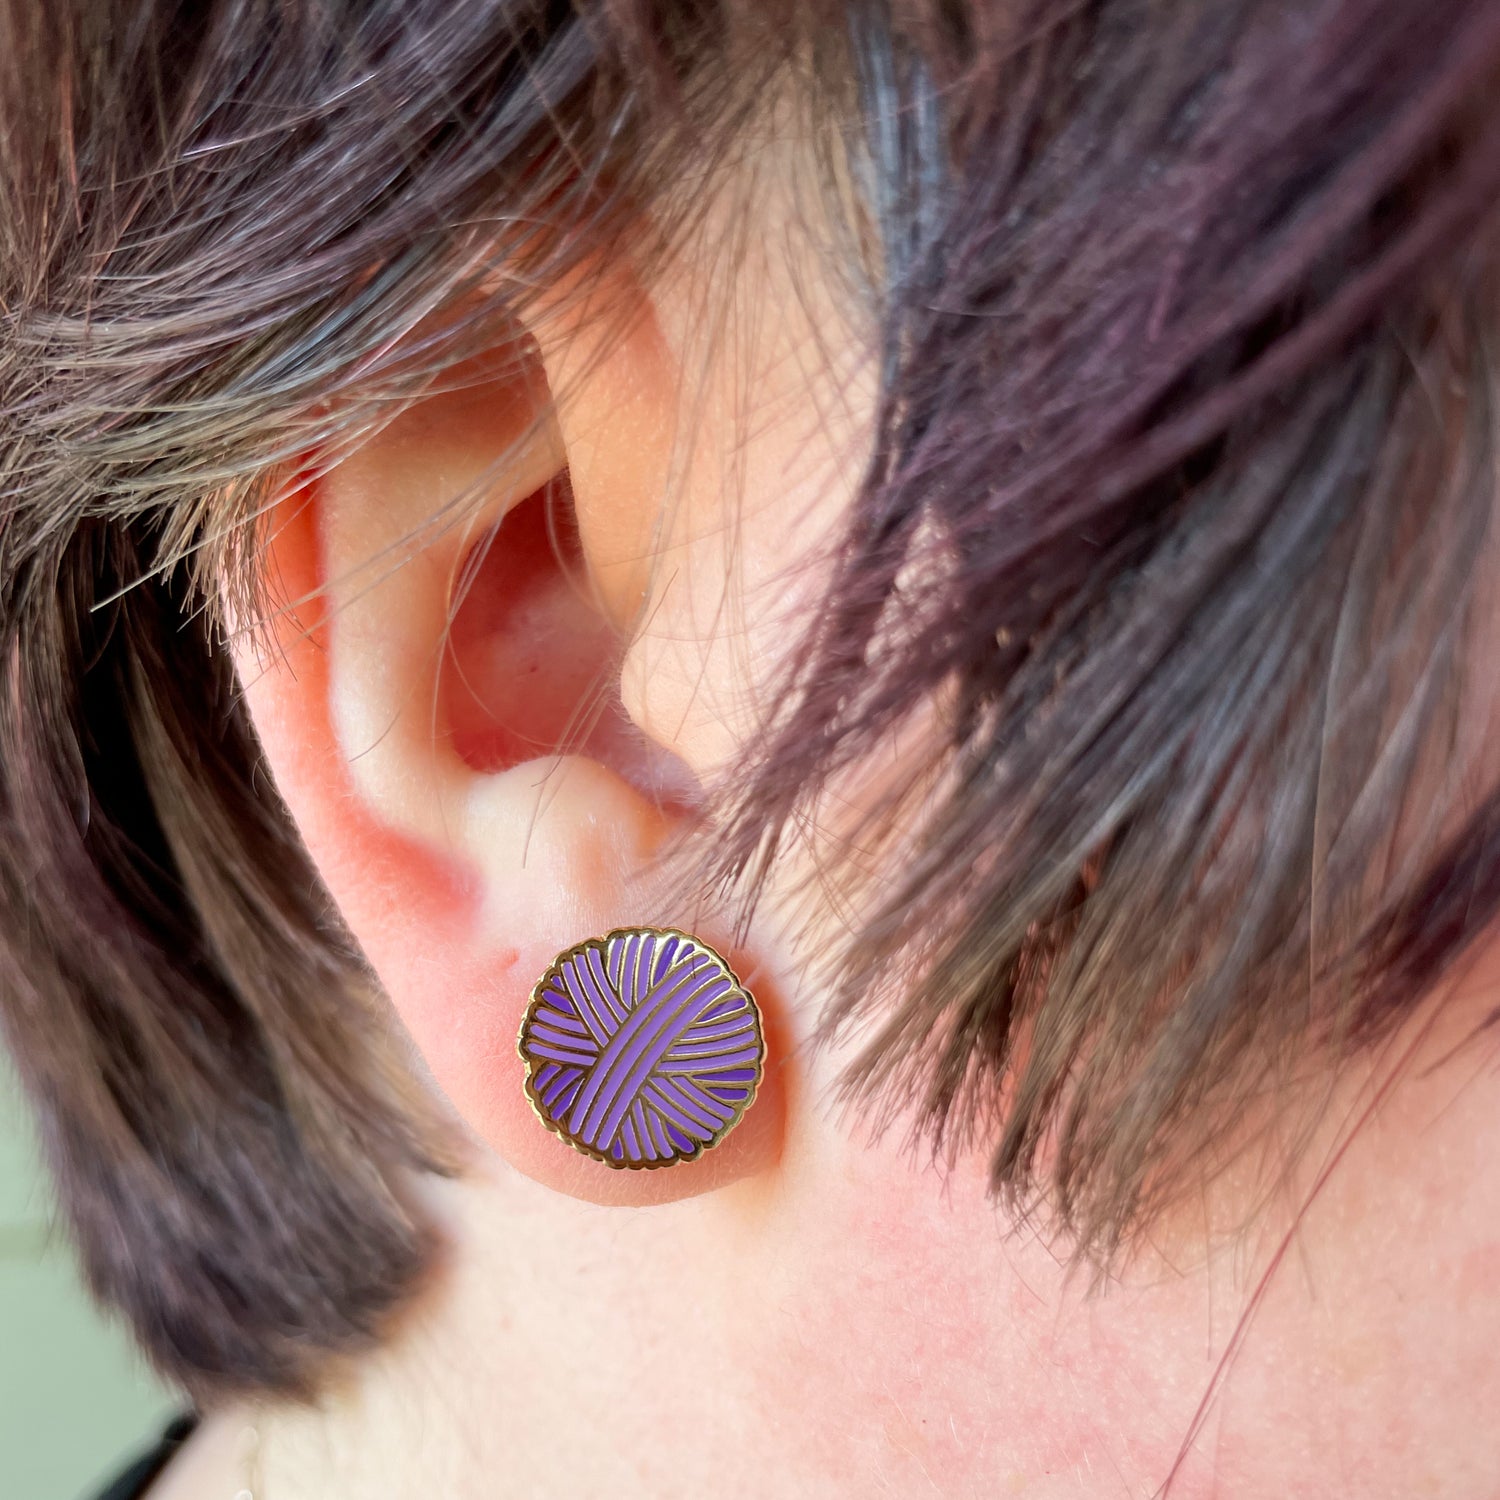 A close up of an ear with short choppy purple hair around it, there is a purple yarn ball earring on the earlobe. 